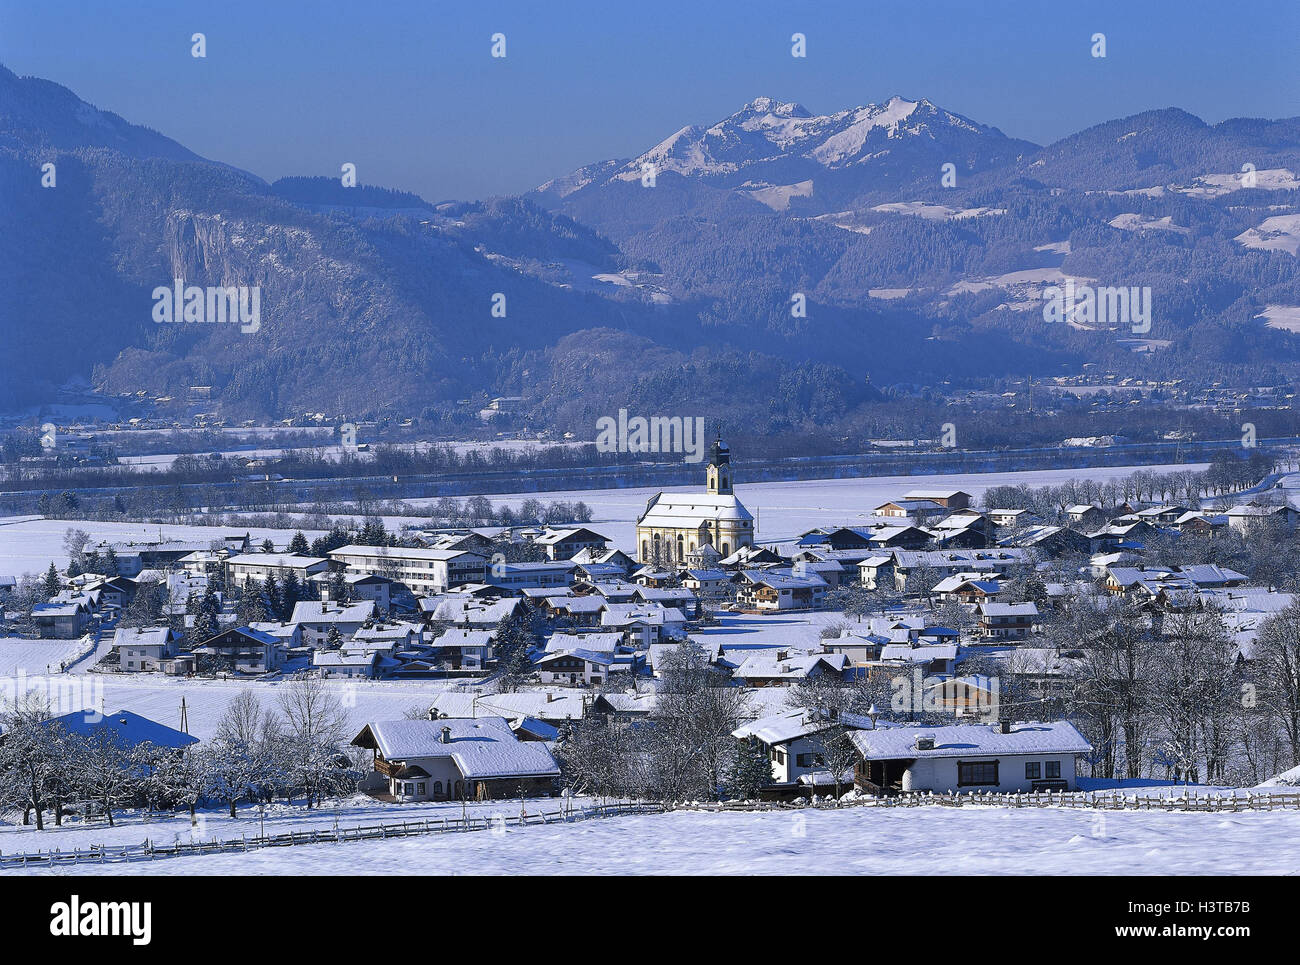 Austria, Tyrol, Ebbs, local view, mountain landscape, winter, Europe, Westösterreich, federal state, winter sports area, winter vacation, place, residential houses, church, mountains, snow Stock Photo